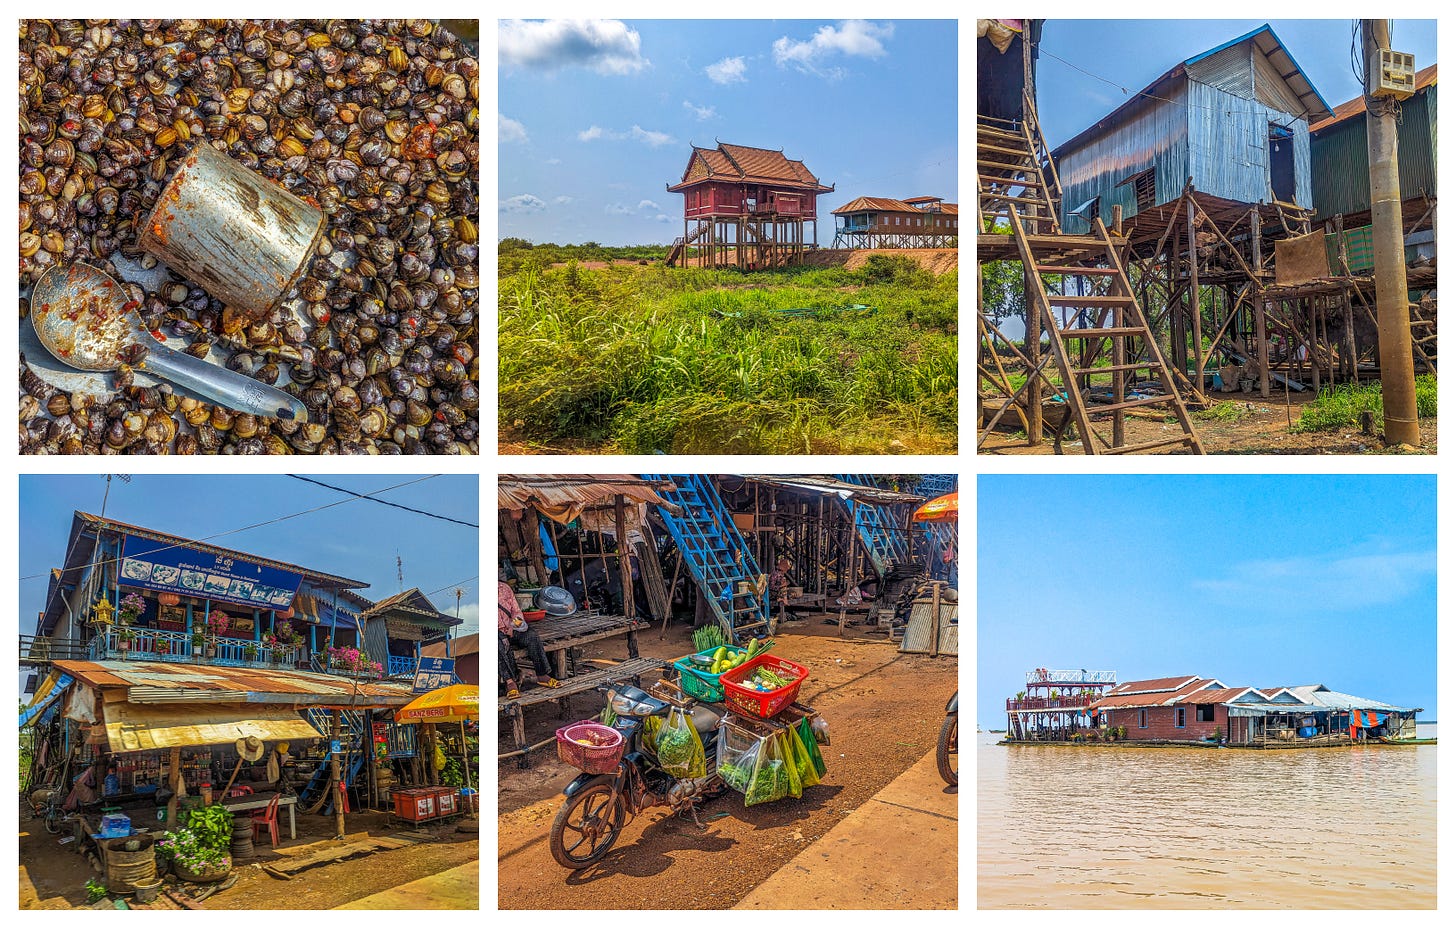 Six photos showing a house on a stilt in the middle of a field, a store under a house that will be underwater in a few months, a bicycle laden with produce parked on the road, a closeup of roasted mussels, and a floating restaurant. 